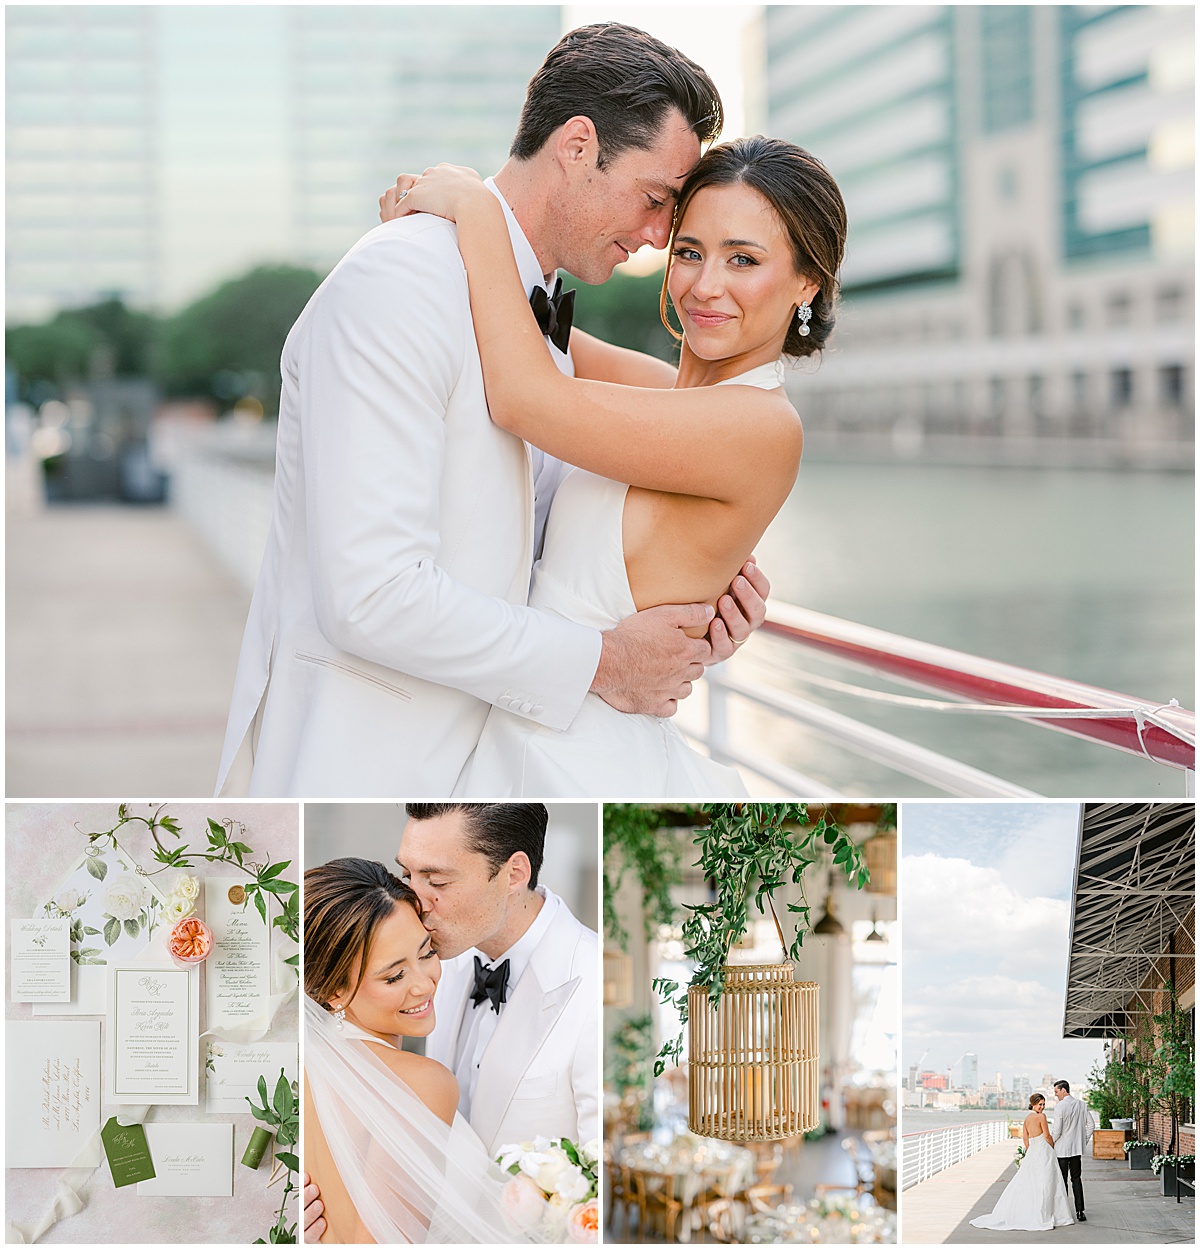 Battello Summer wedding in Jersey City with peach, ivory and green accent details